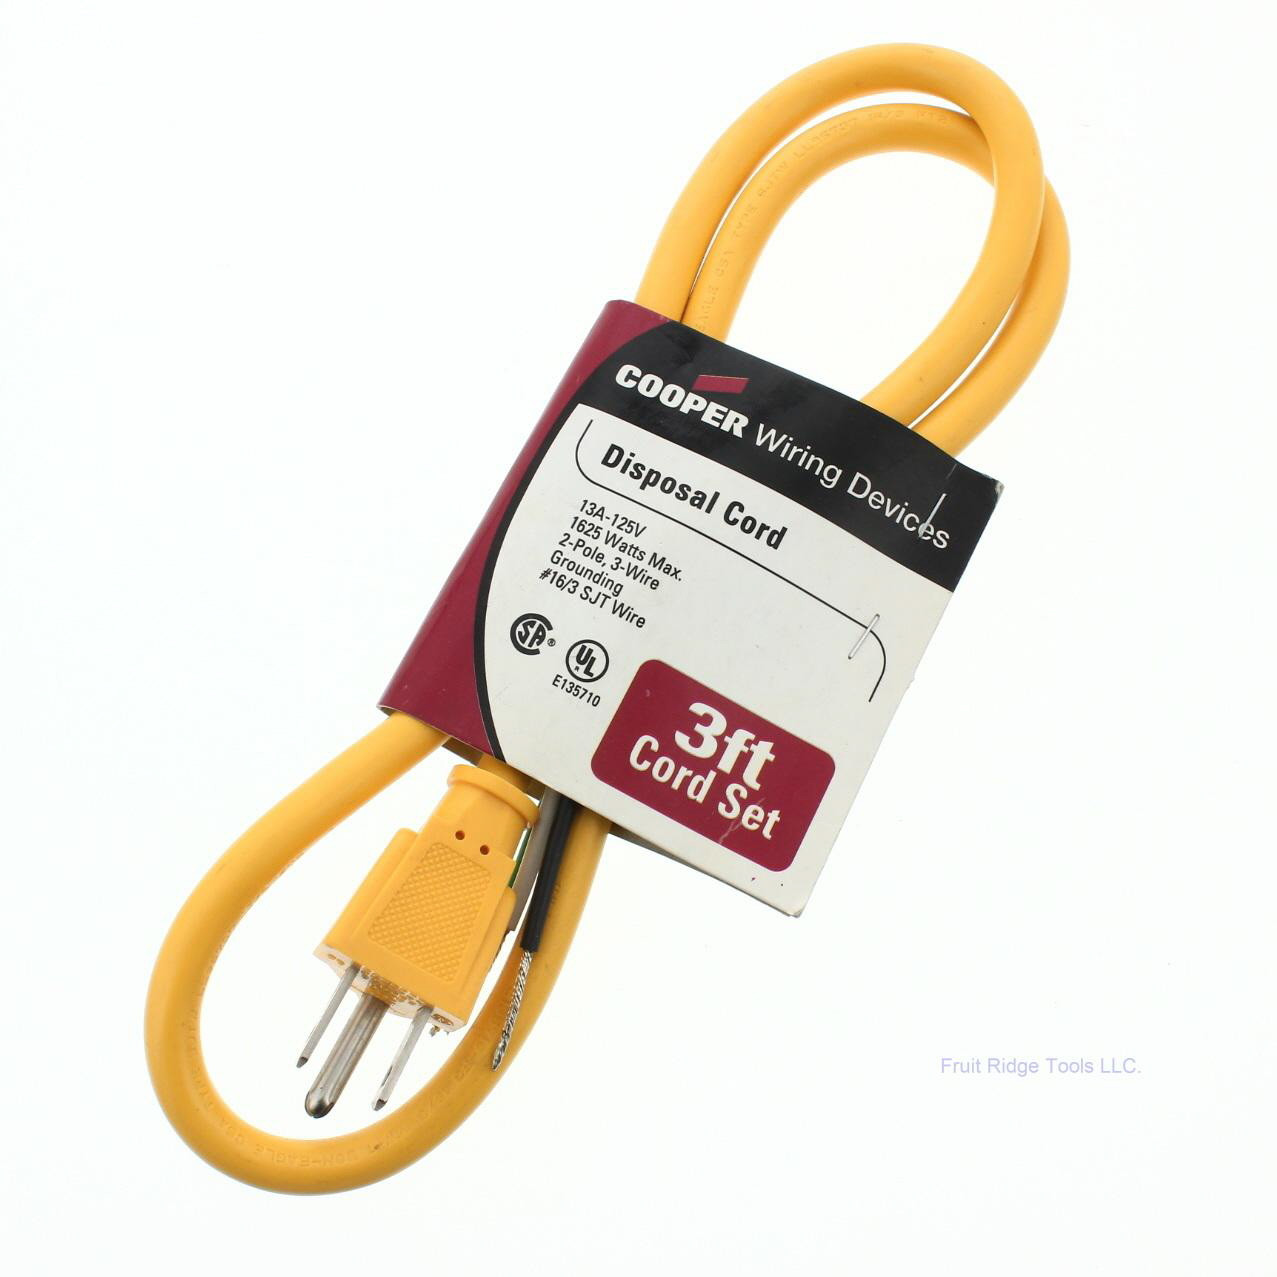 Cooper Yellow 3ft Straight Blade Power Extension Cord Nema 5 15p 13a 1v 2 Pole 3 Wire 236 Bu In Stock Fruit Ridge Tools